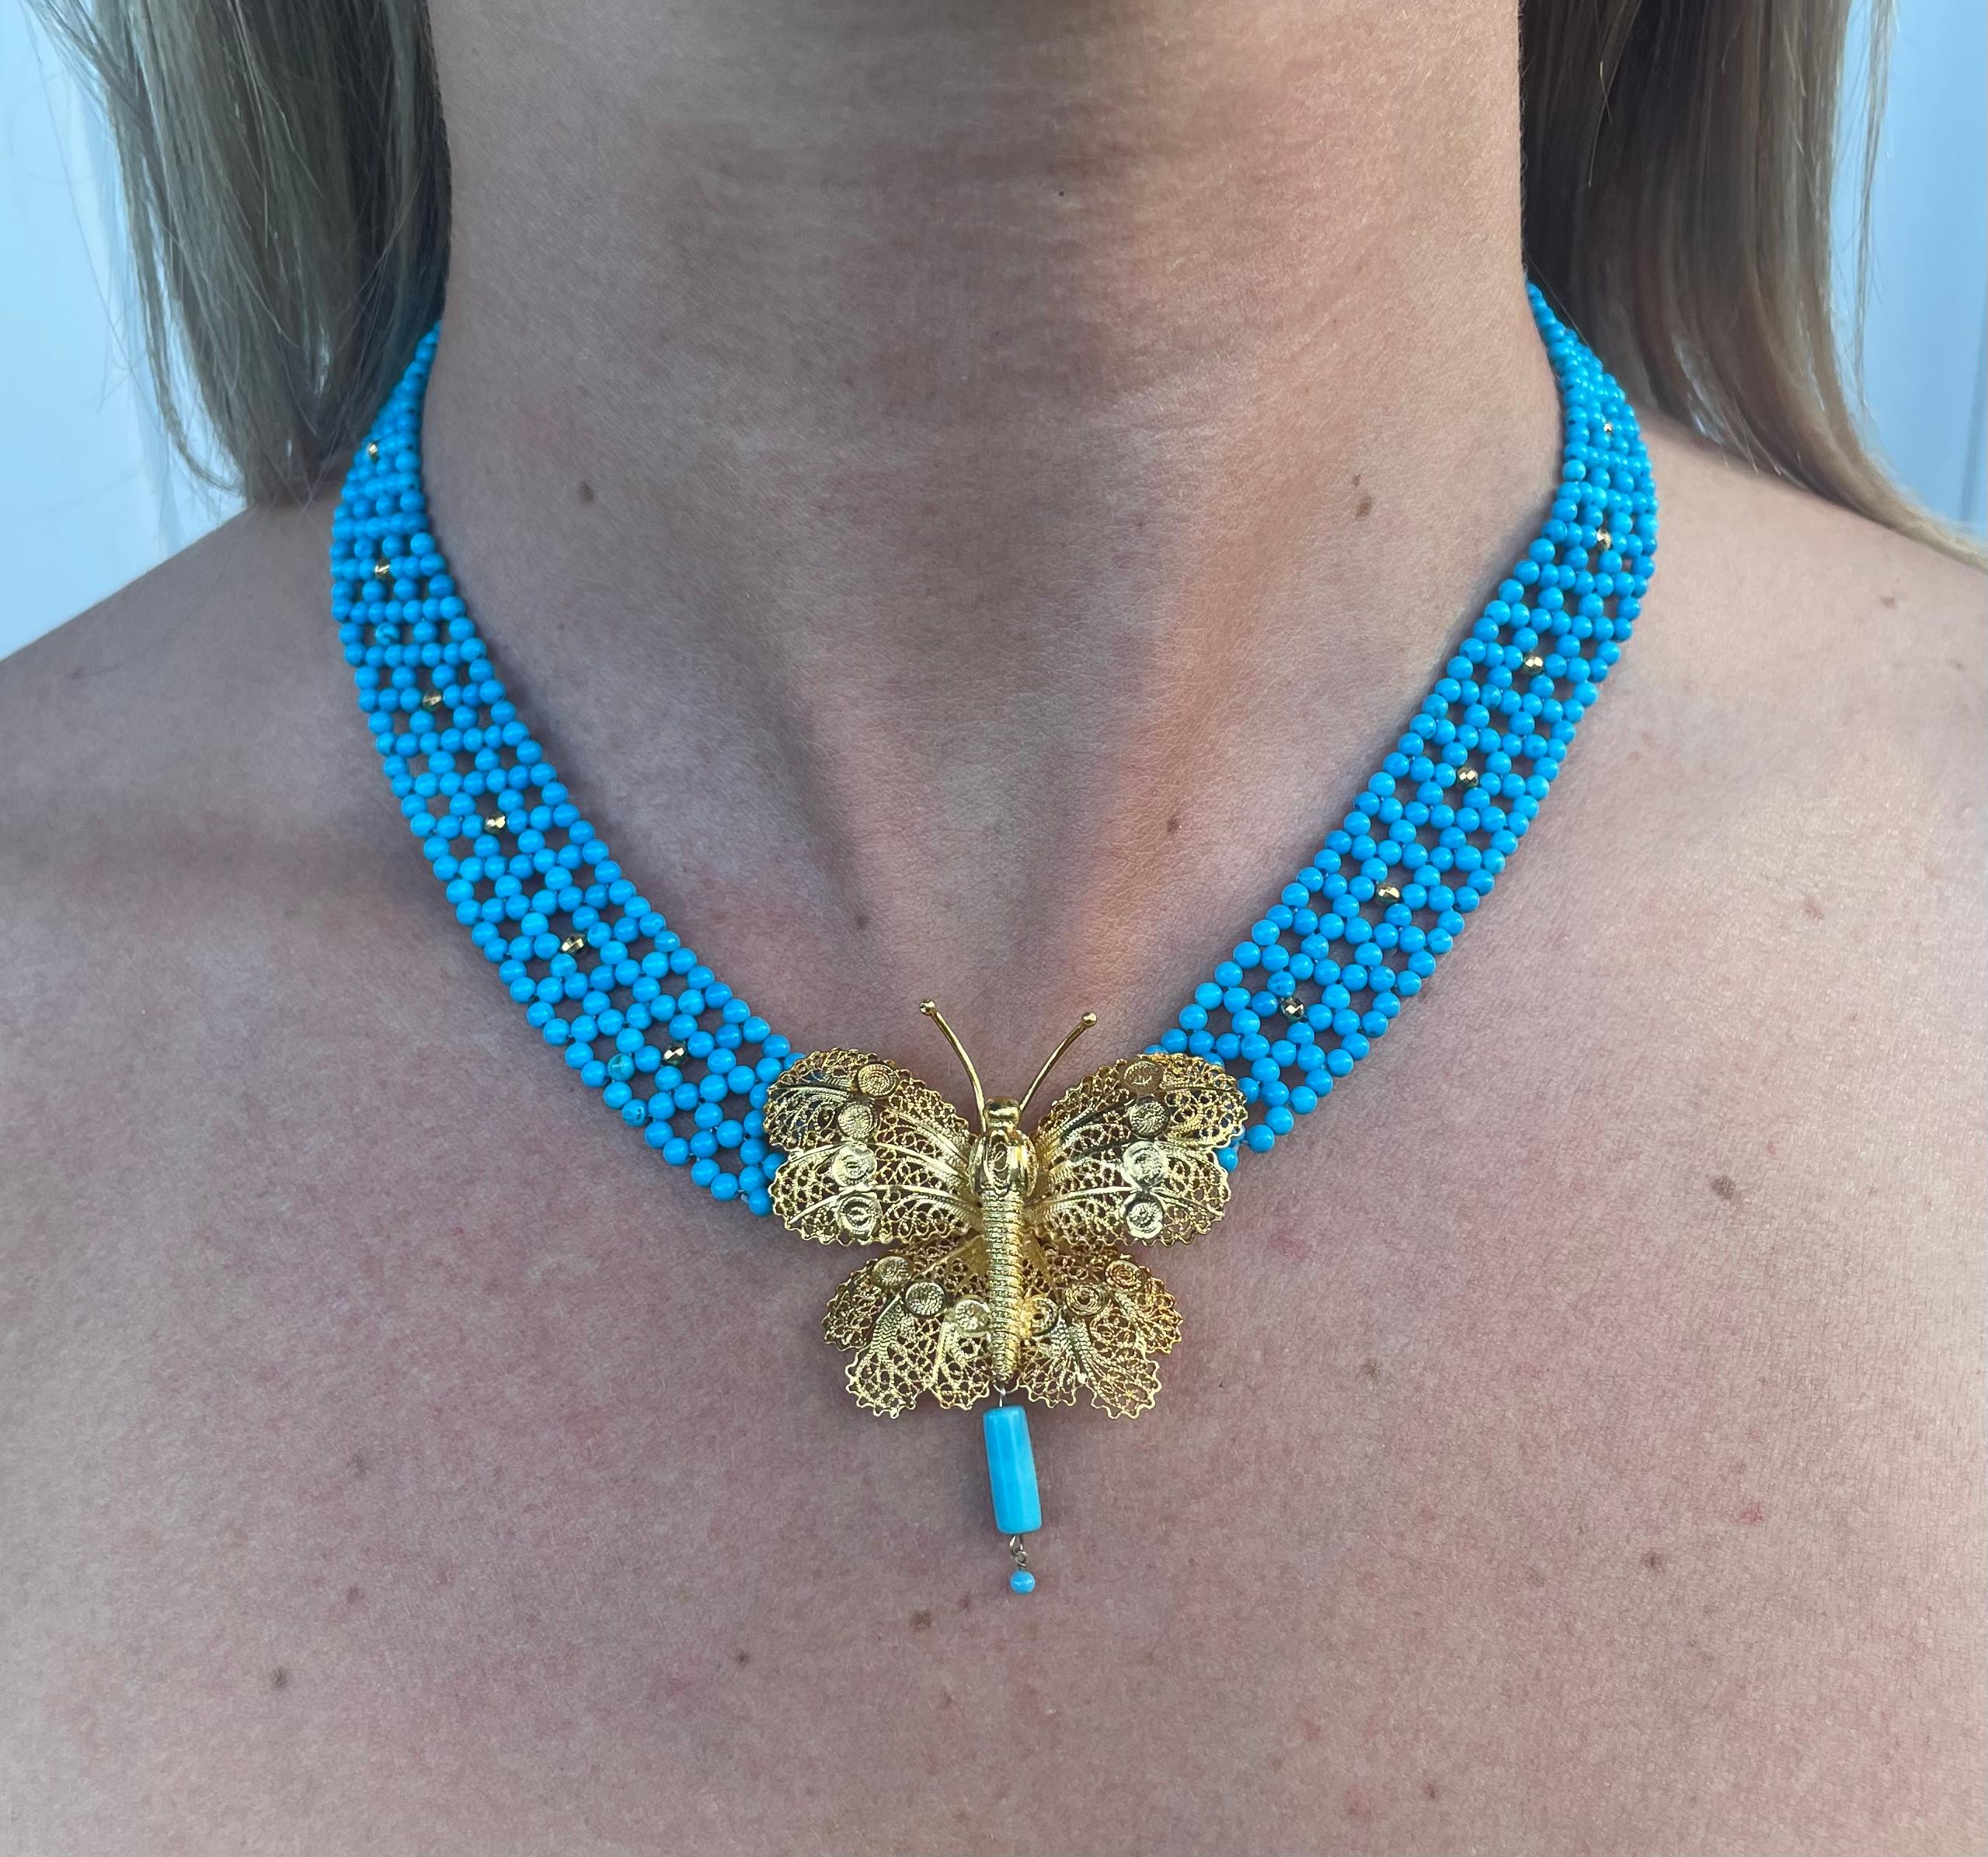 Bead Marina J. Turquoise Woven Necklace with Yellow Gold Butterfly Centerpiece For Sale